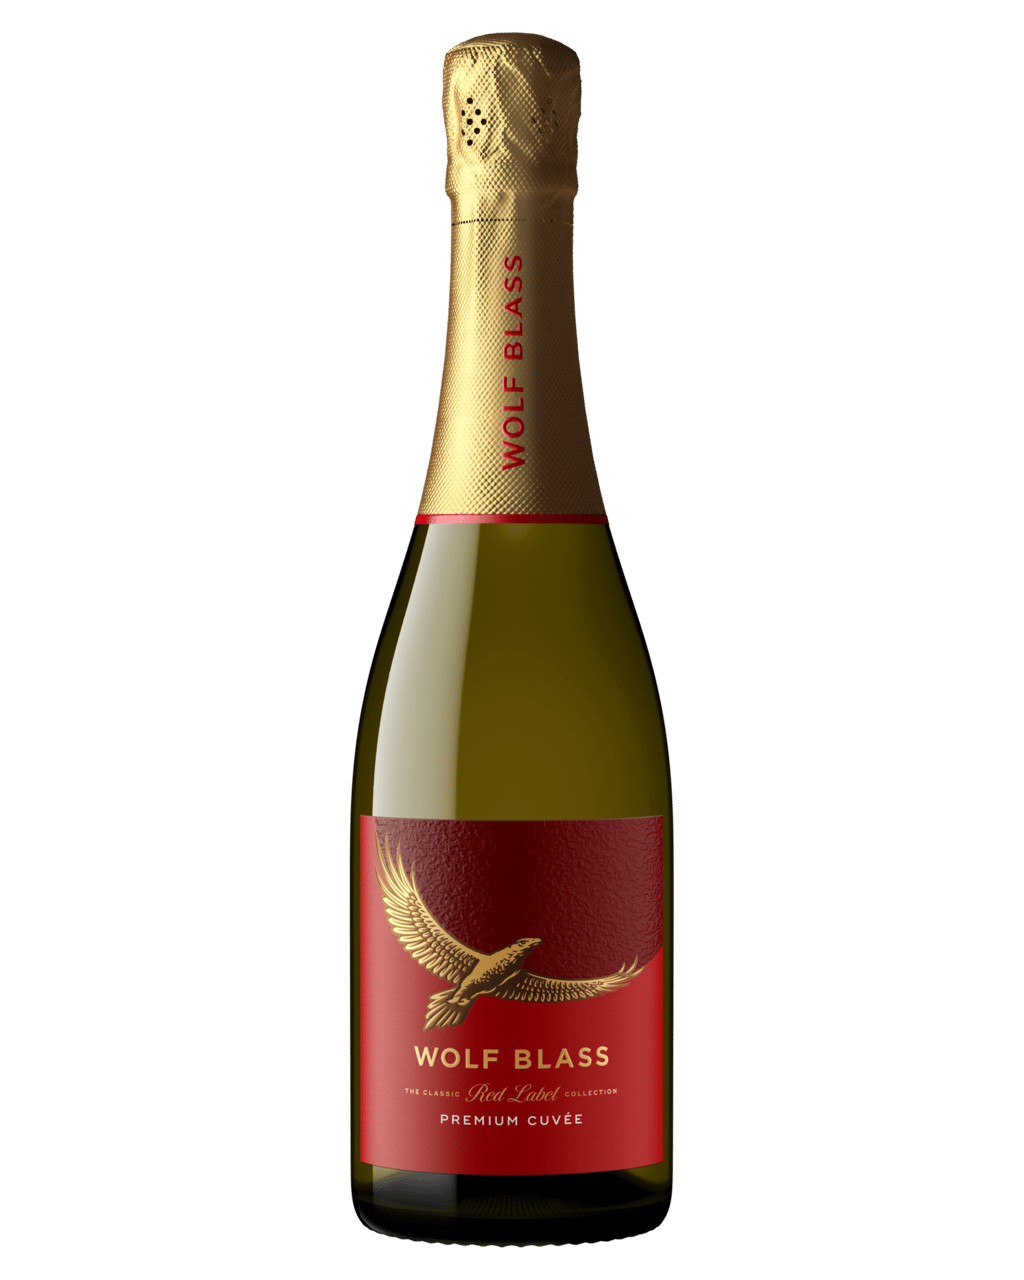 Buy Wolf Blass Red Chardonnay Pinot Premium Cuvée Online or Near You in Australia [with Same Day Delivery* & Best Offers] - Dan Murphy's